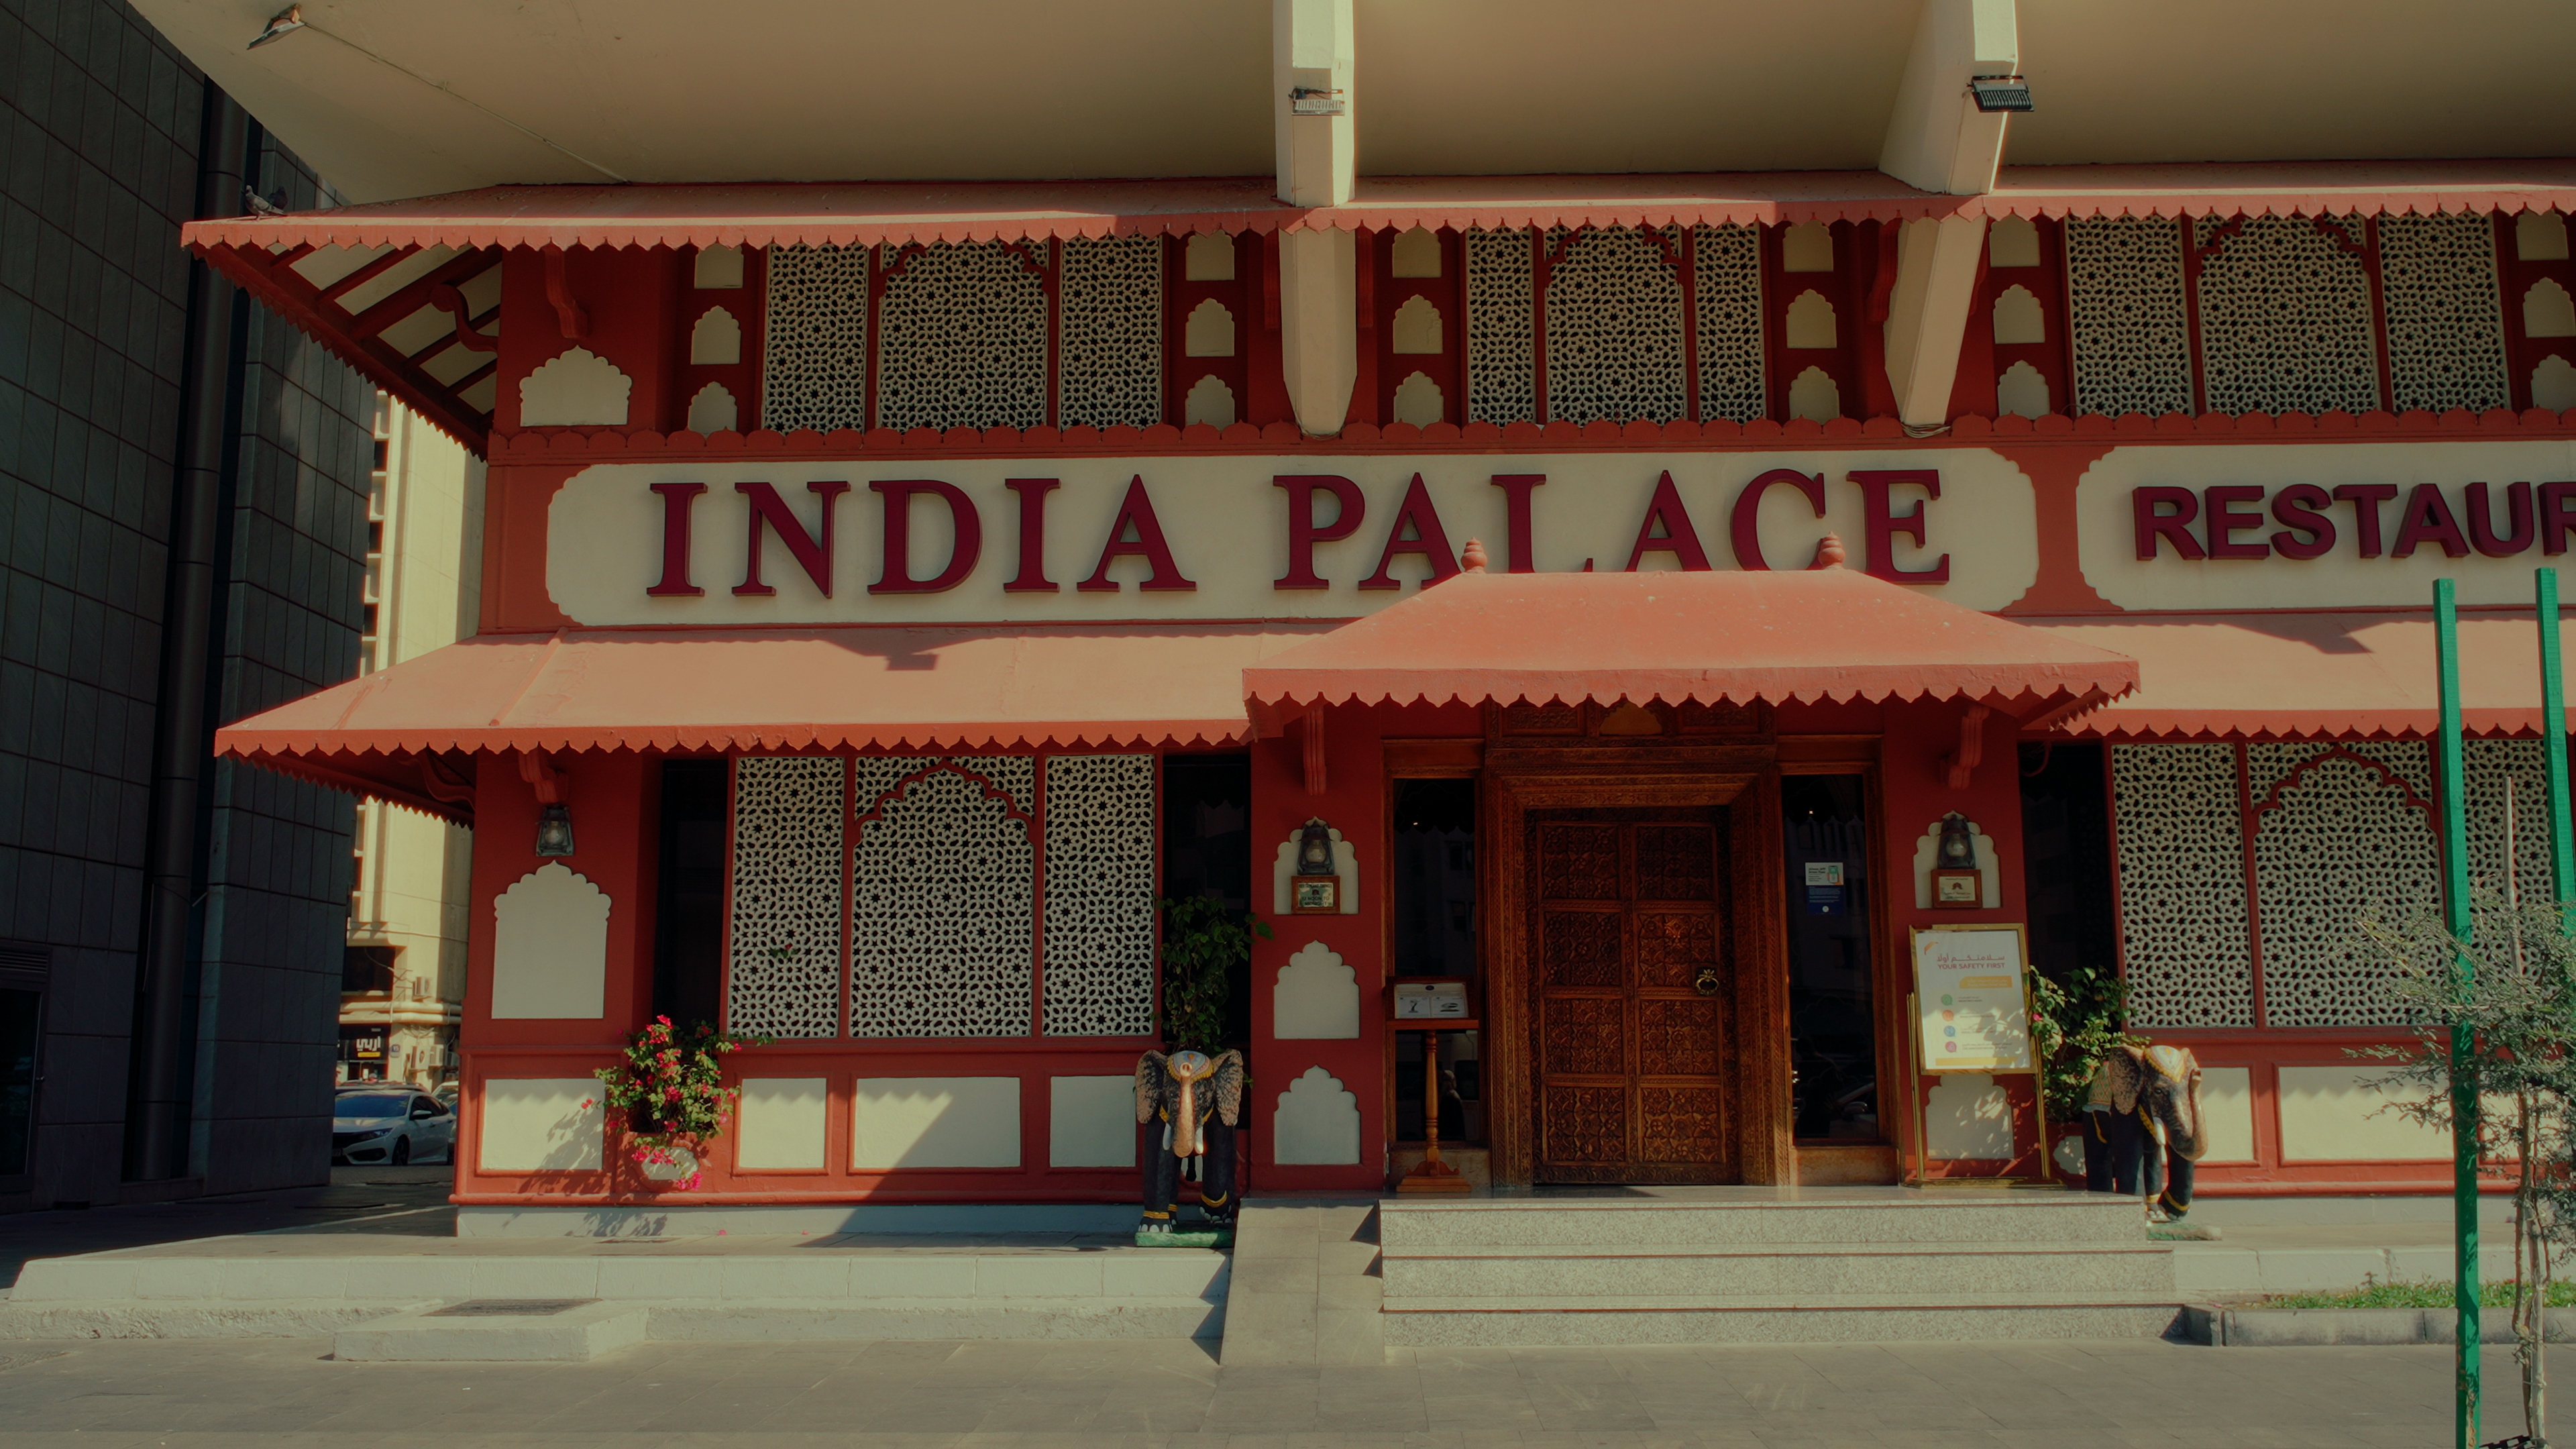 Red and white exterior of India Palace Restaurant in Abu Dhabi